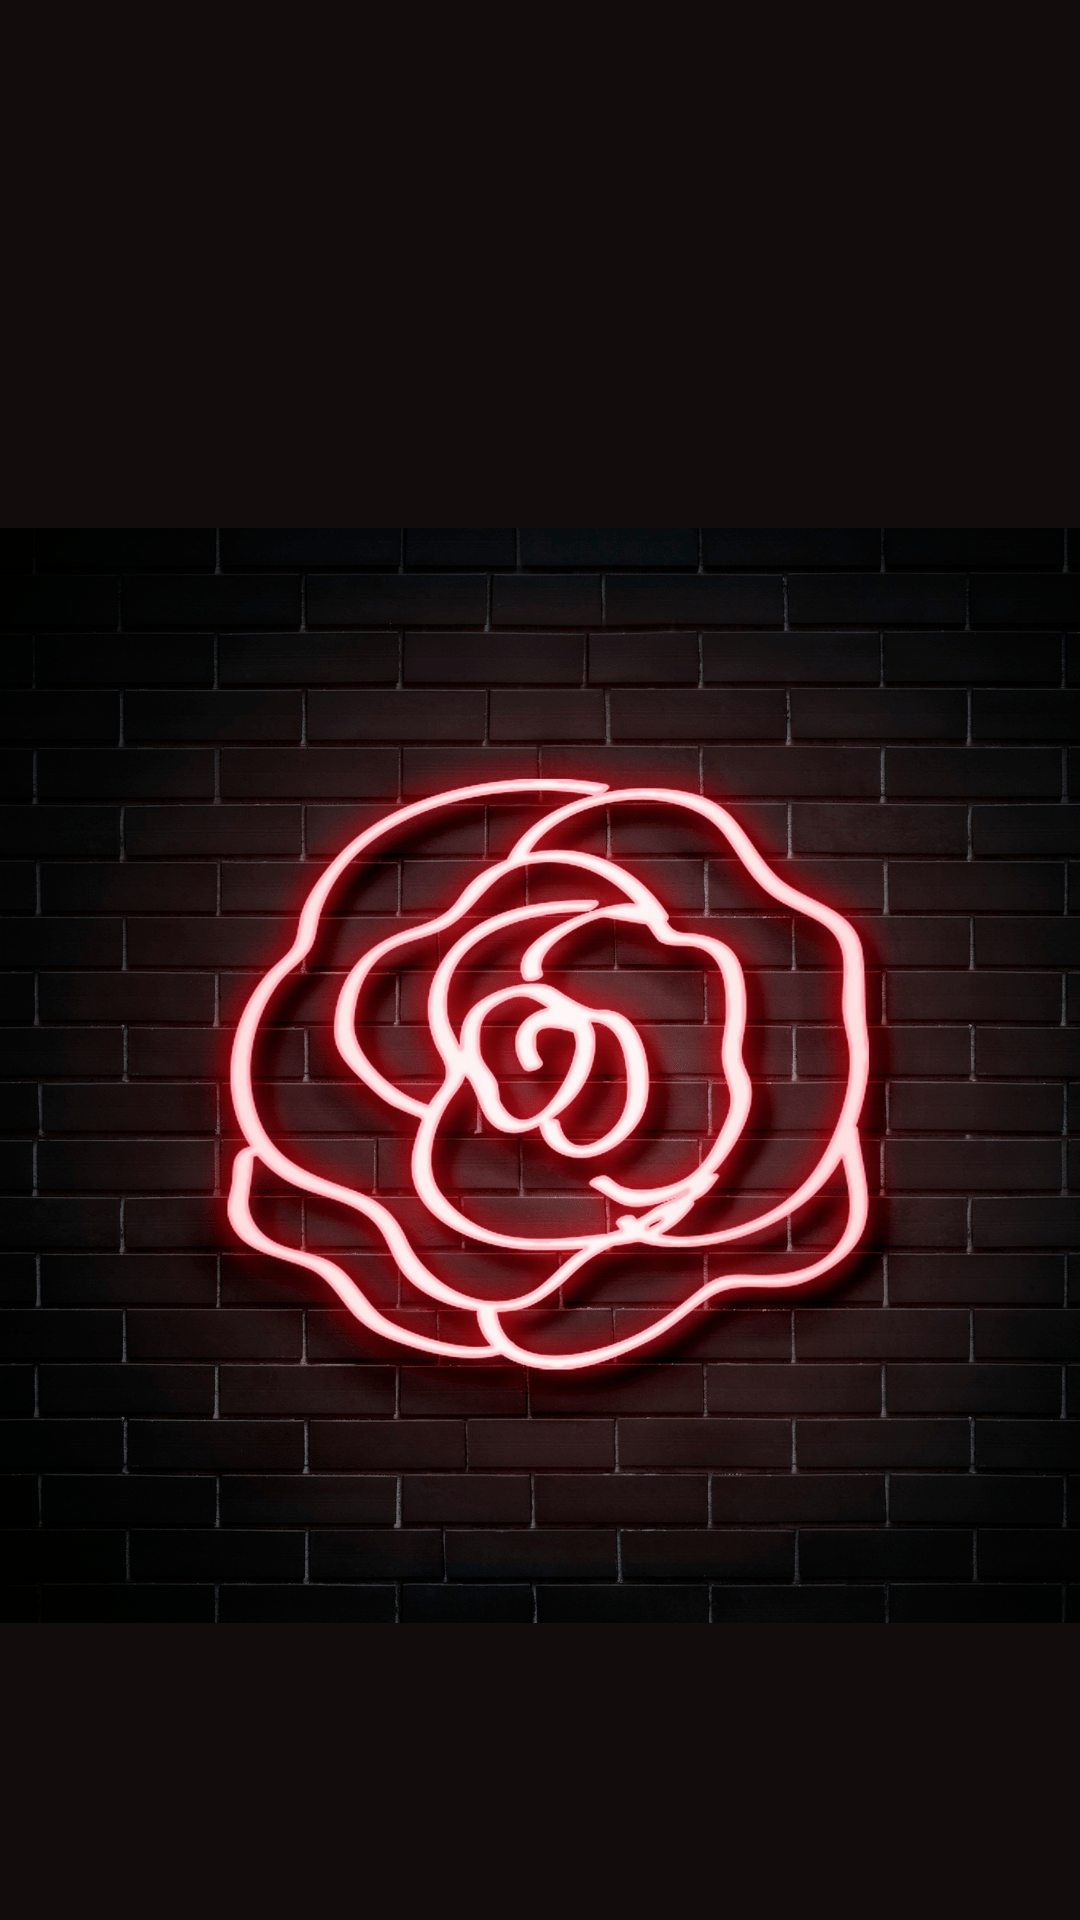 A neon rose sign on the wall - Neon red, red, iPhone red